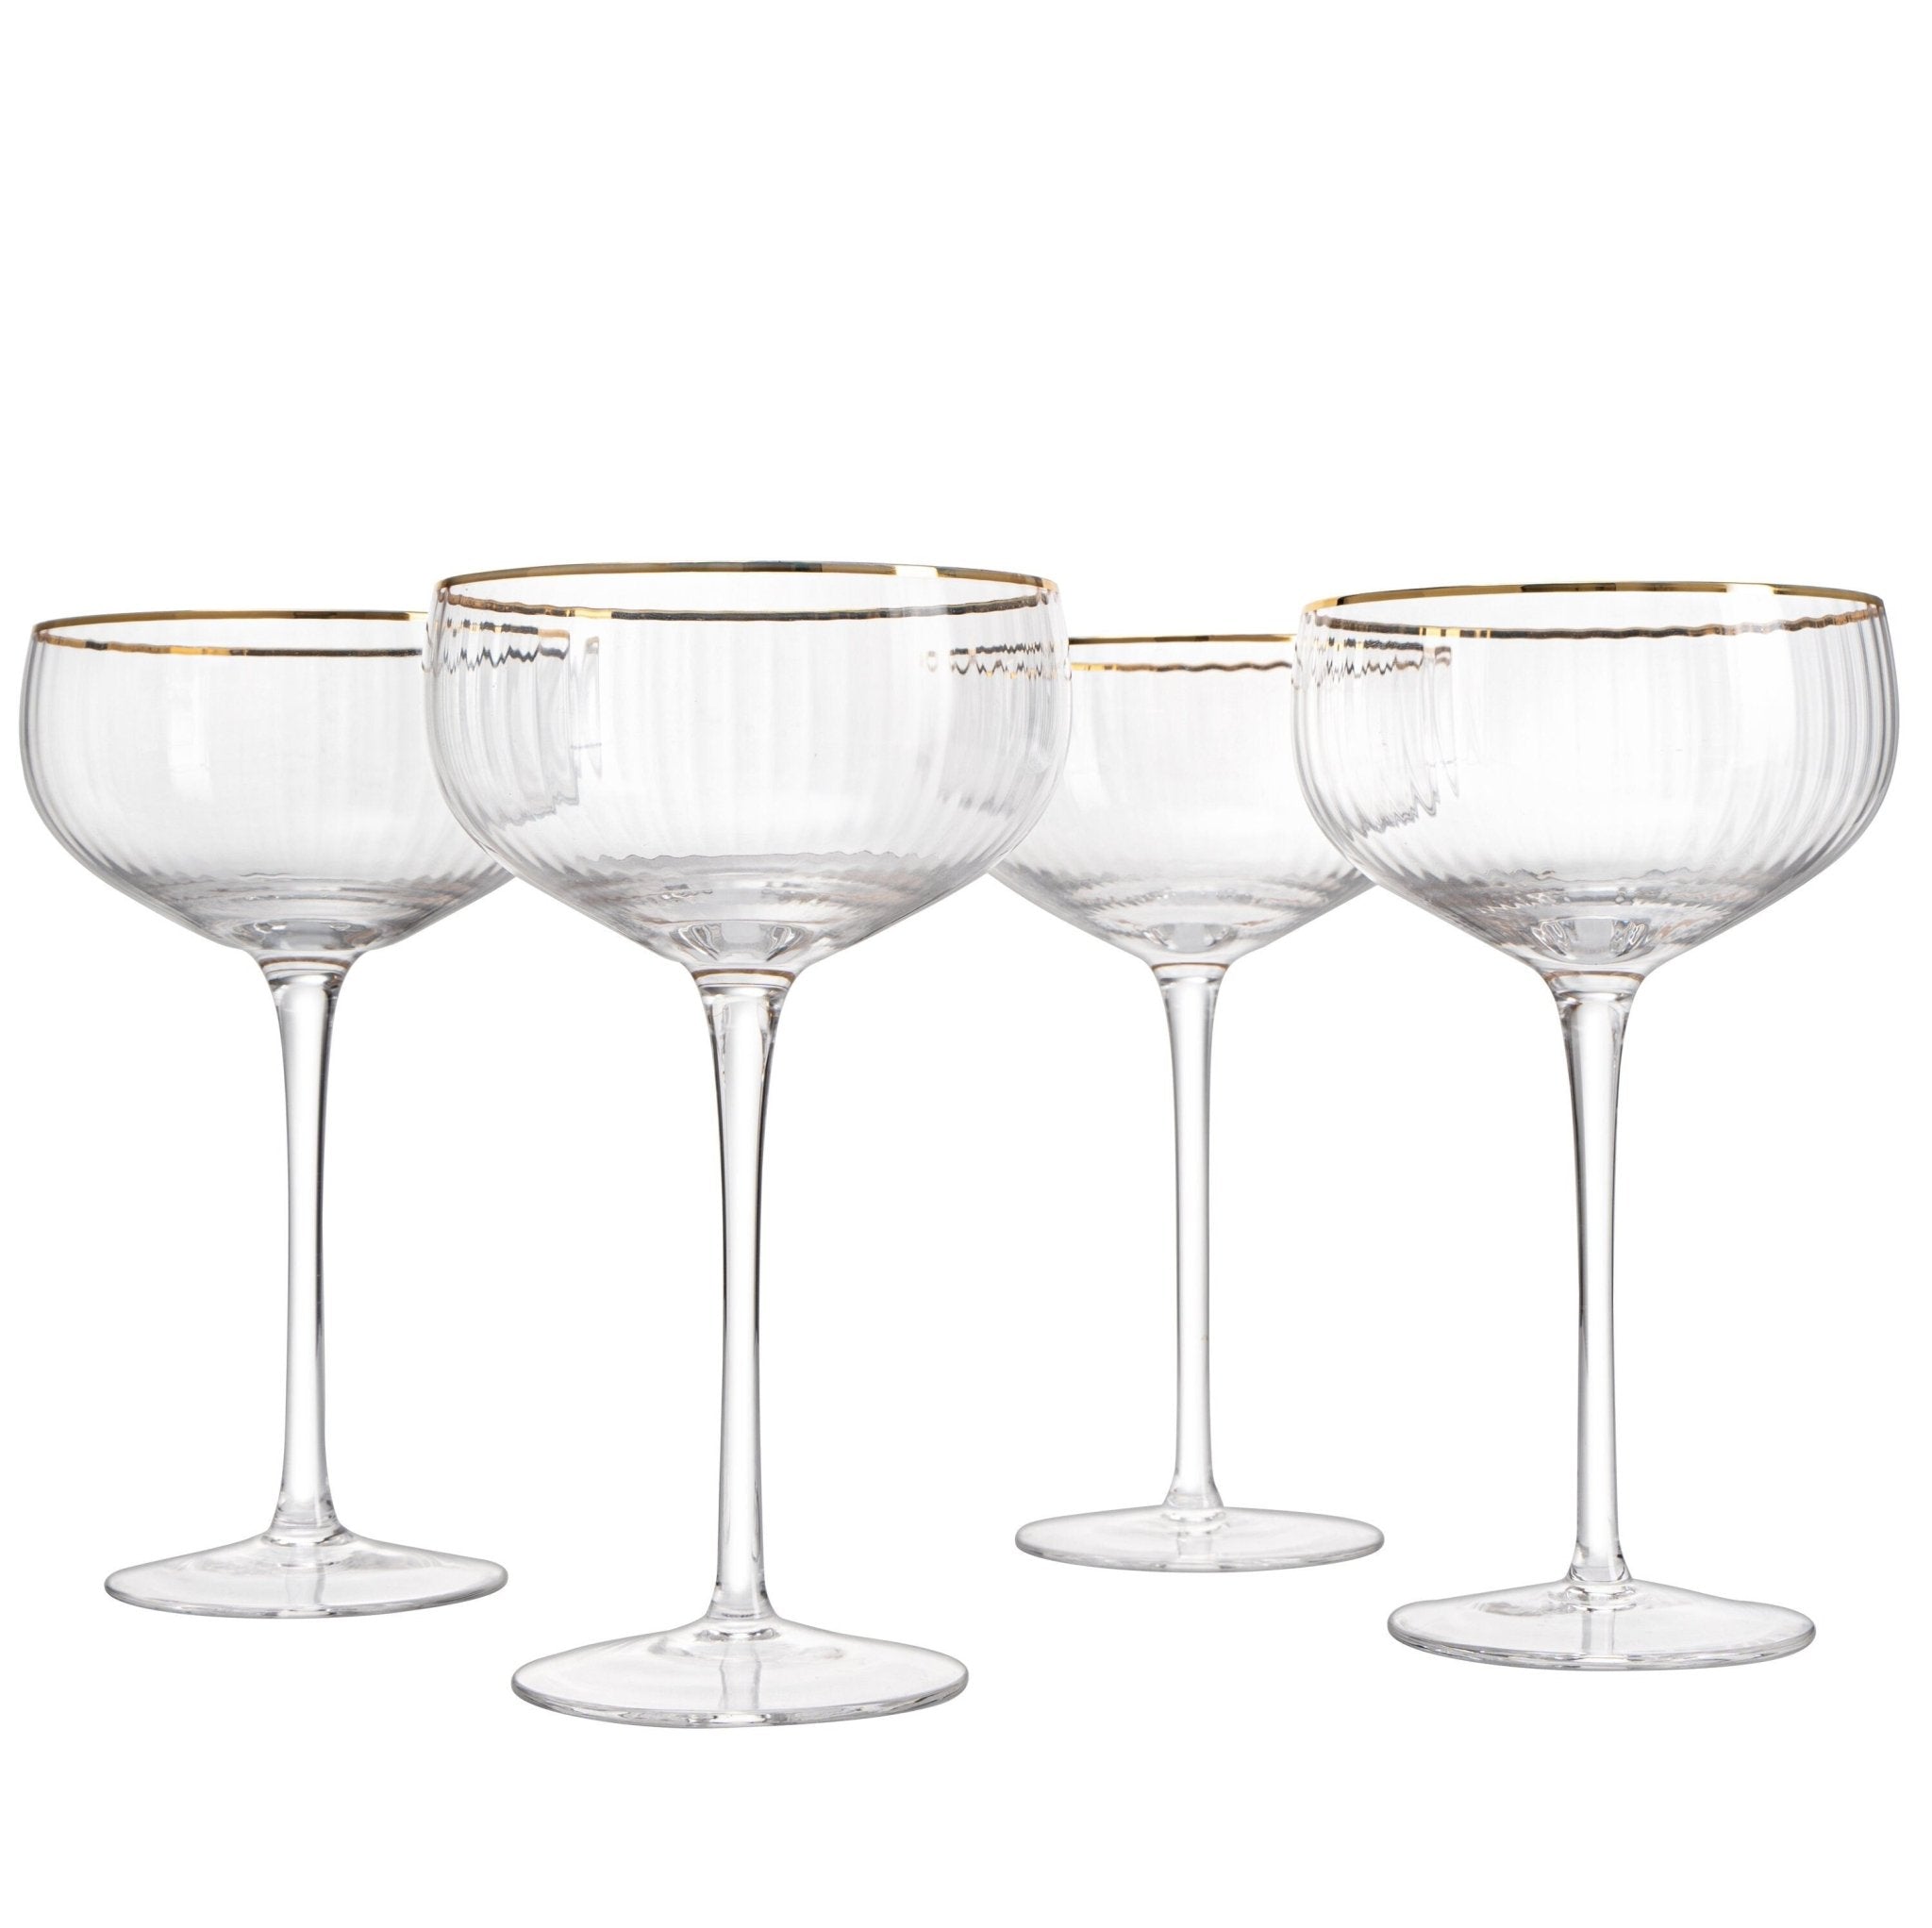 Set of 4 Gold Rim Coupe Glasses by The Wine Savant - The Kindness Cause